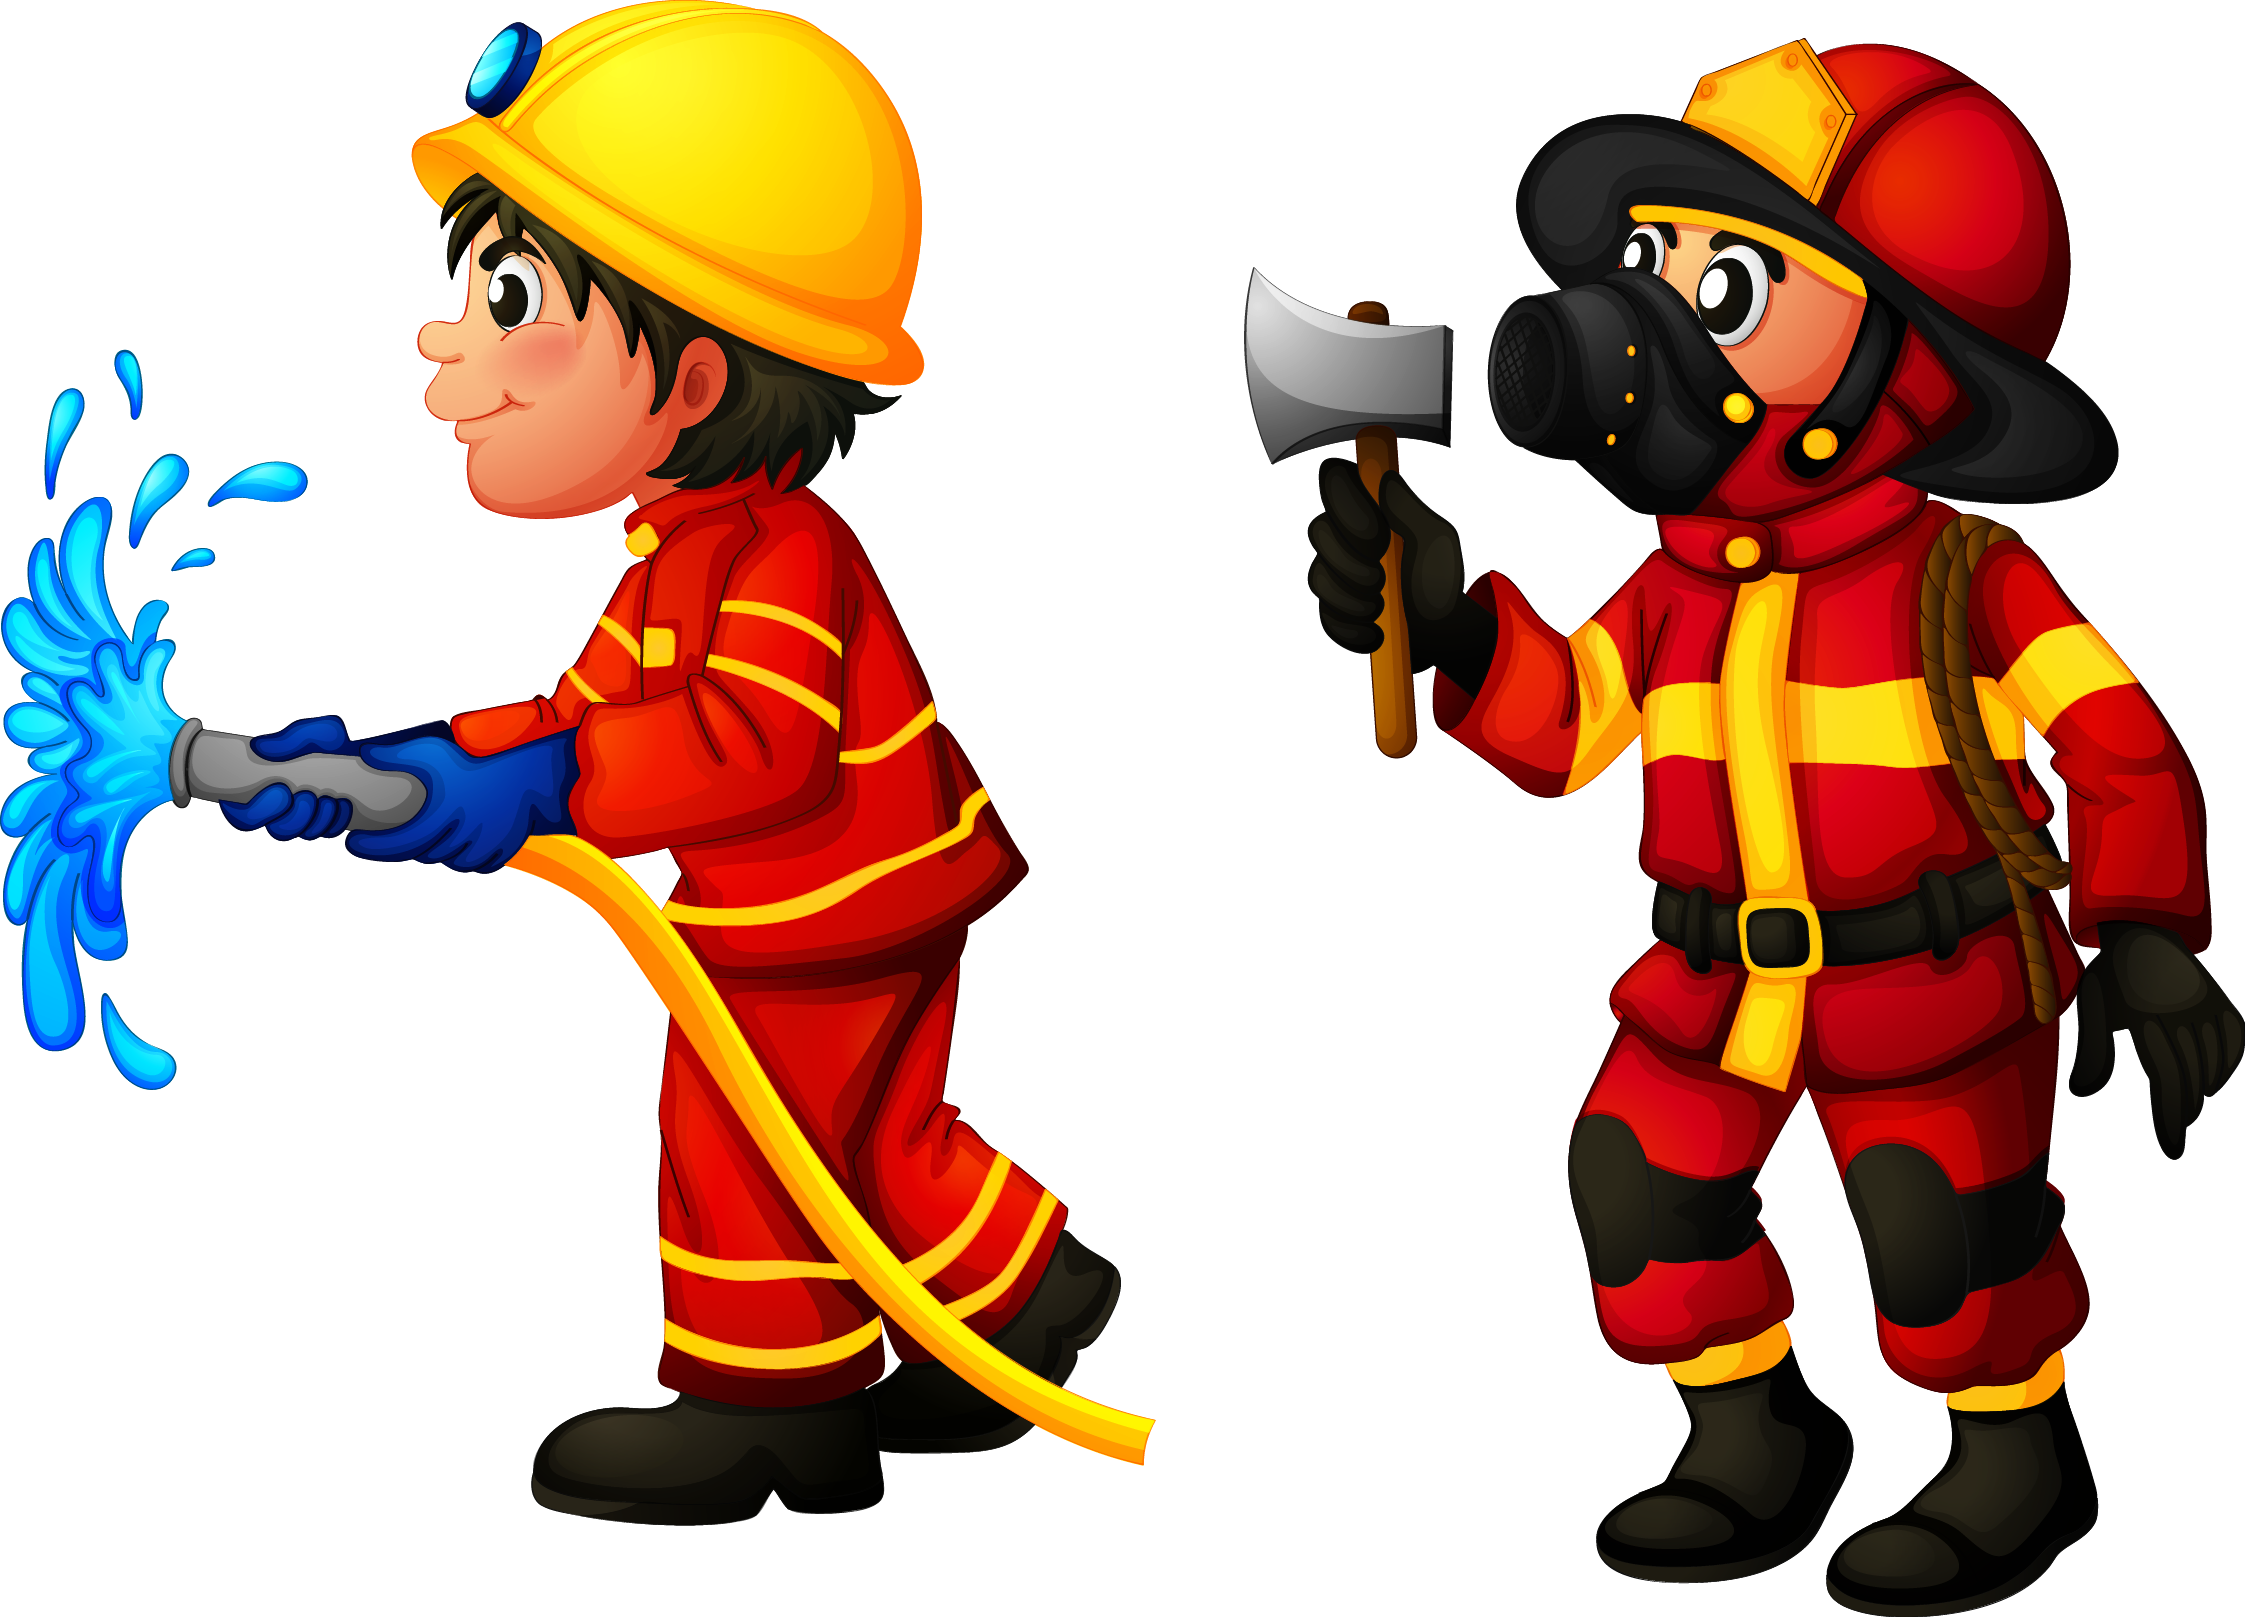 A Couple Of Firemen In Red And Yellow Uniforms